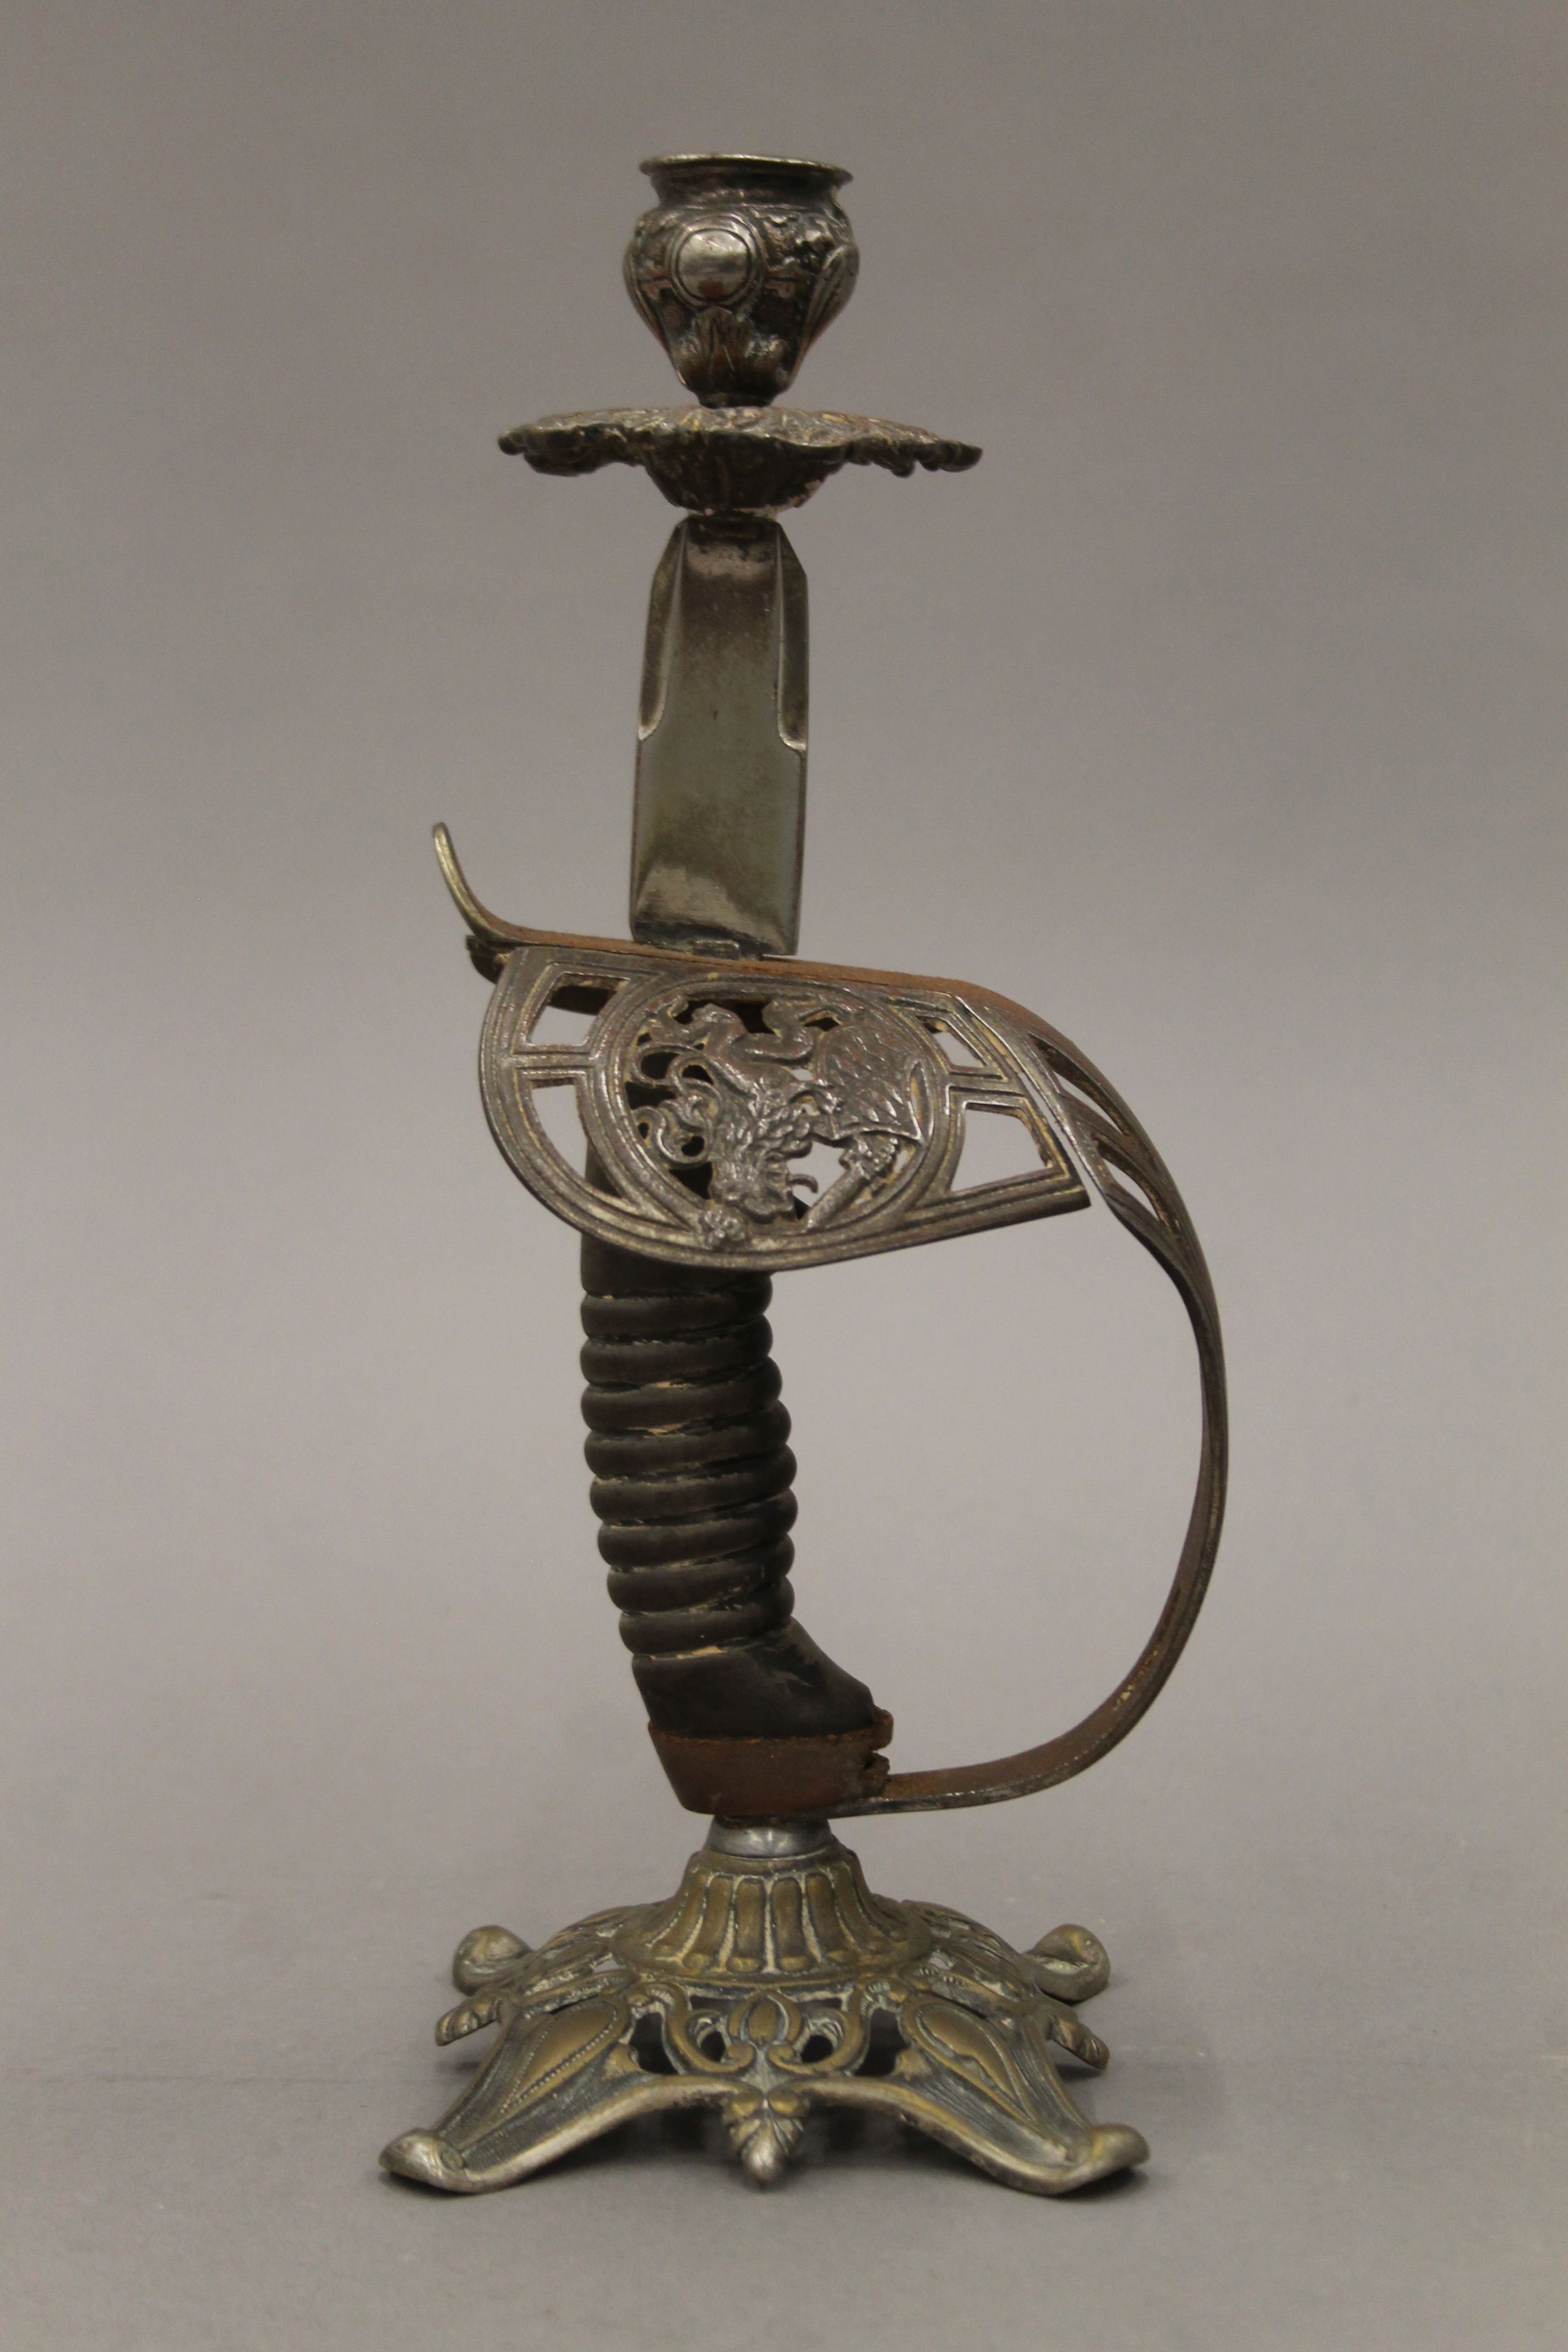 A pair of candlesticks formed from sword handles. 27 cm high. - Image 4 of 6